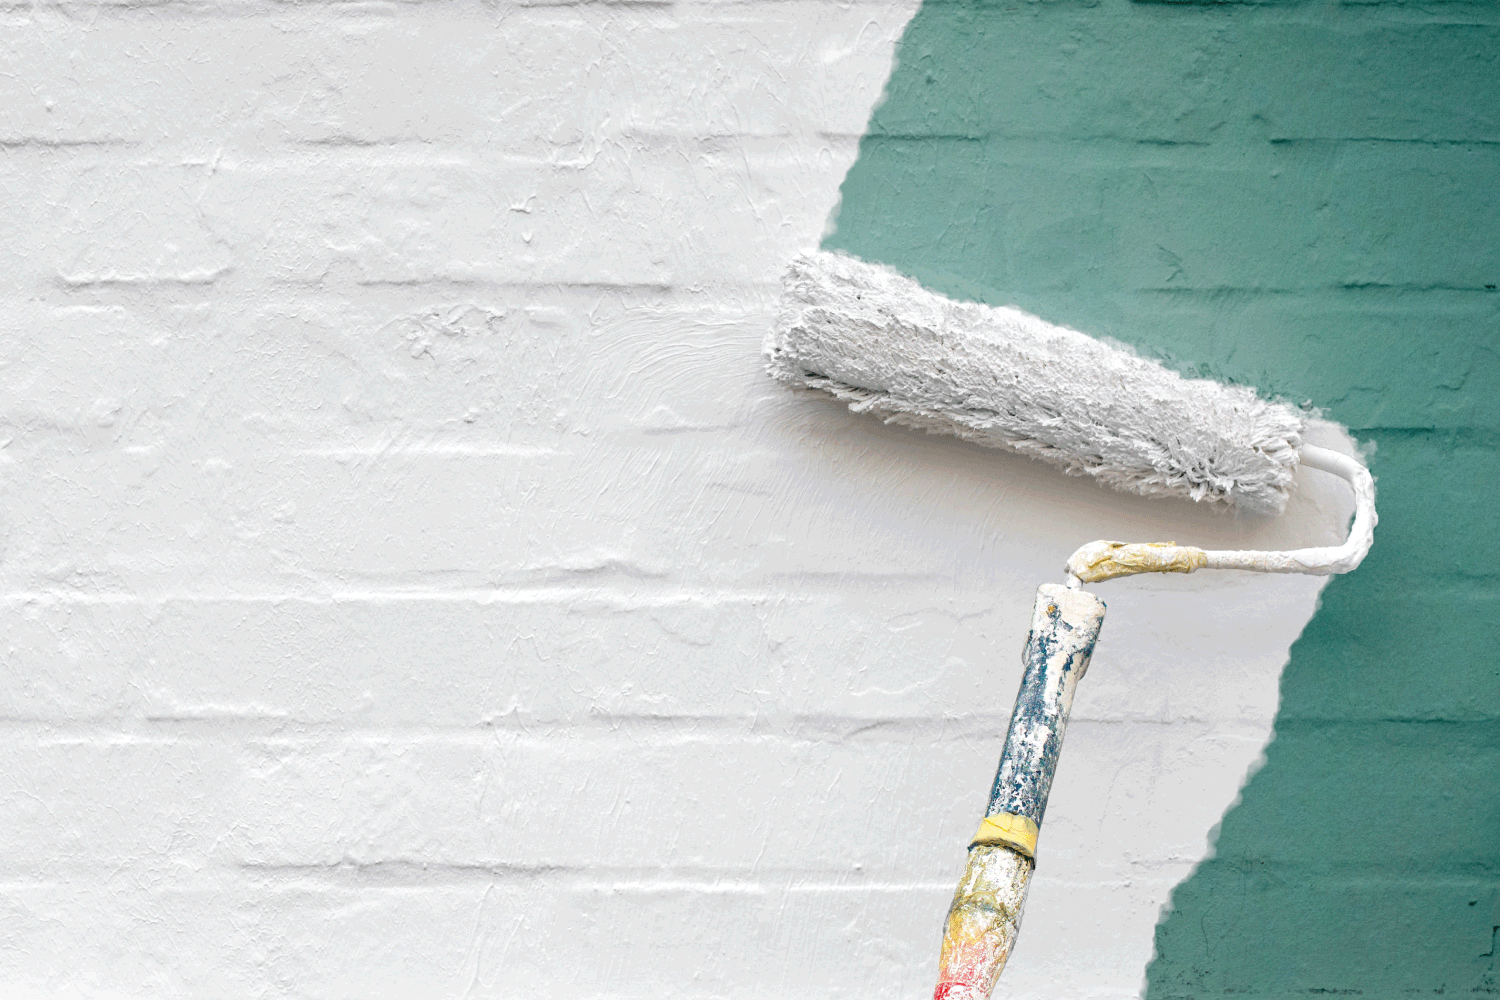 paint roller applying green coat of paint over white brick wall